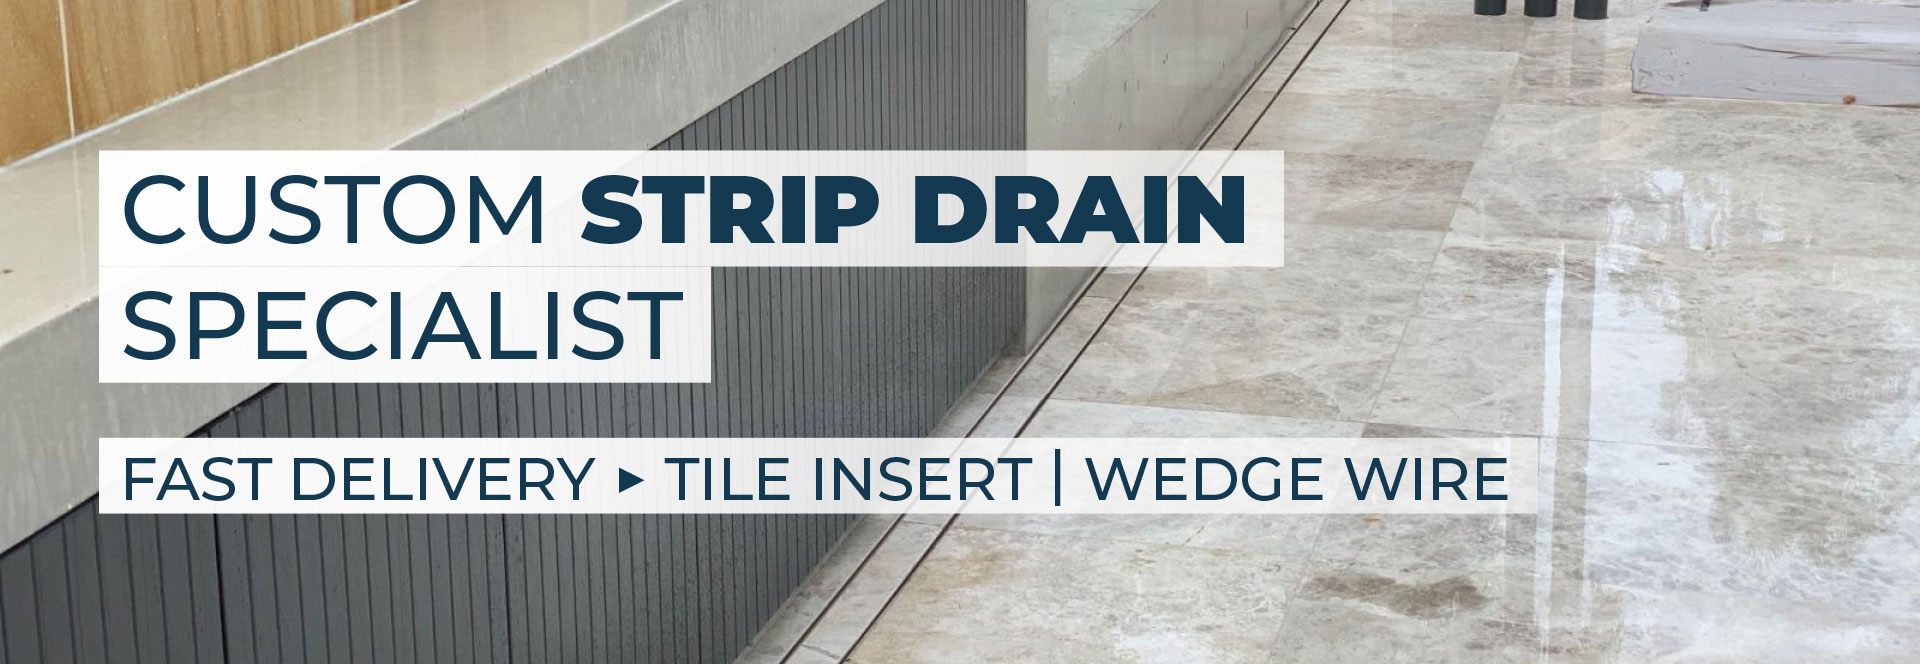 Strip Drains Tile Insert and Wedge Wire